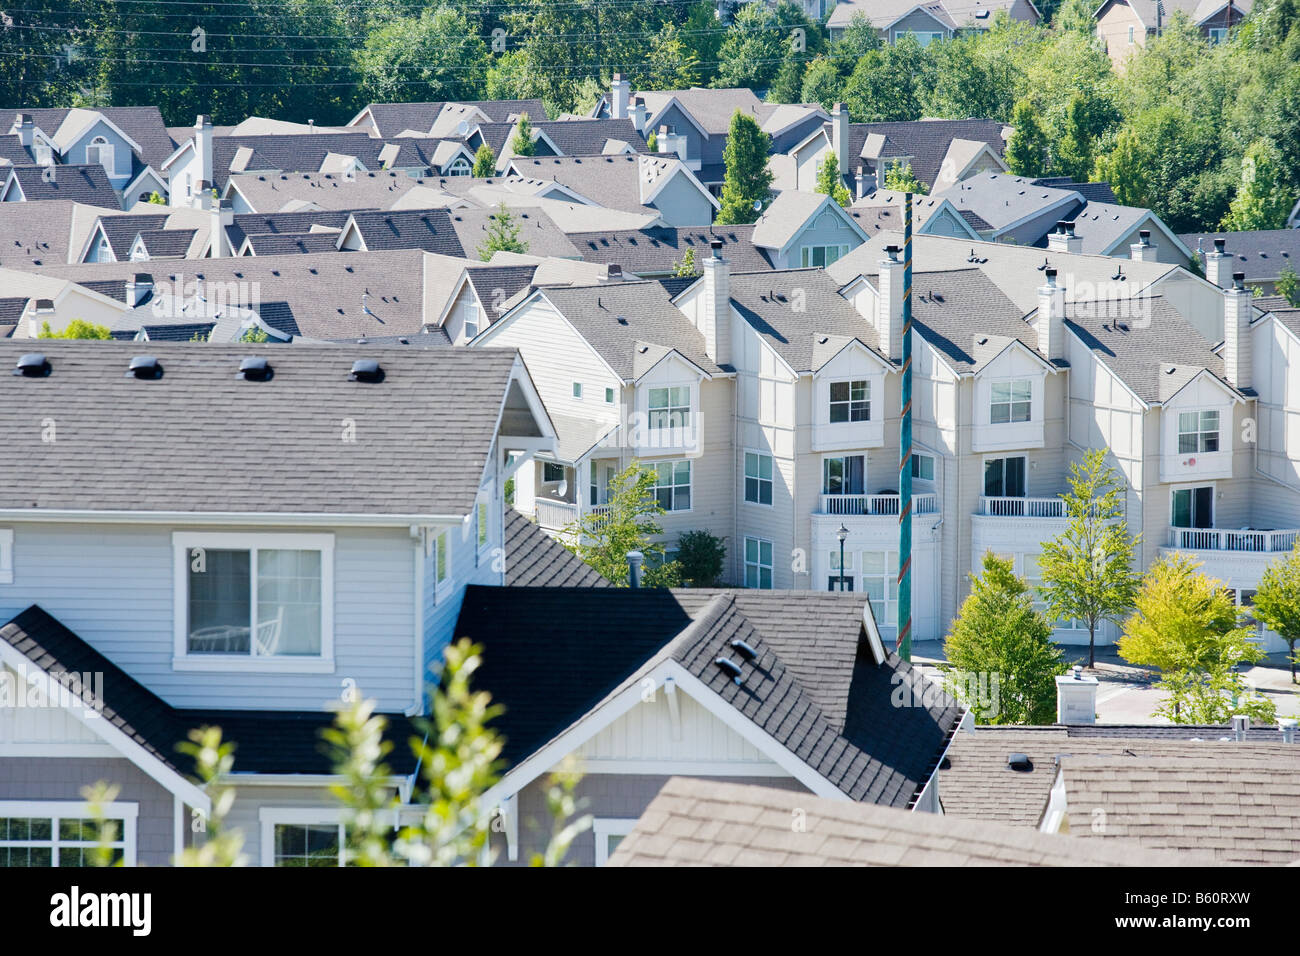 High angle view of a housing development in Issaquah WA United States Stock Photo